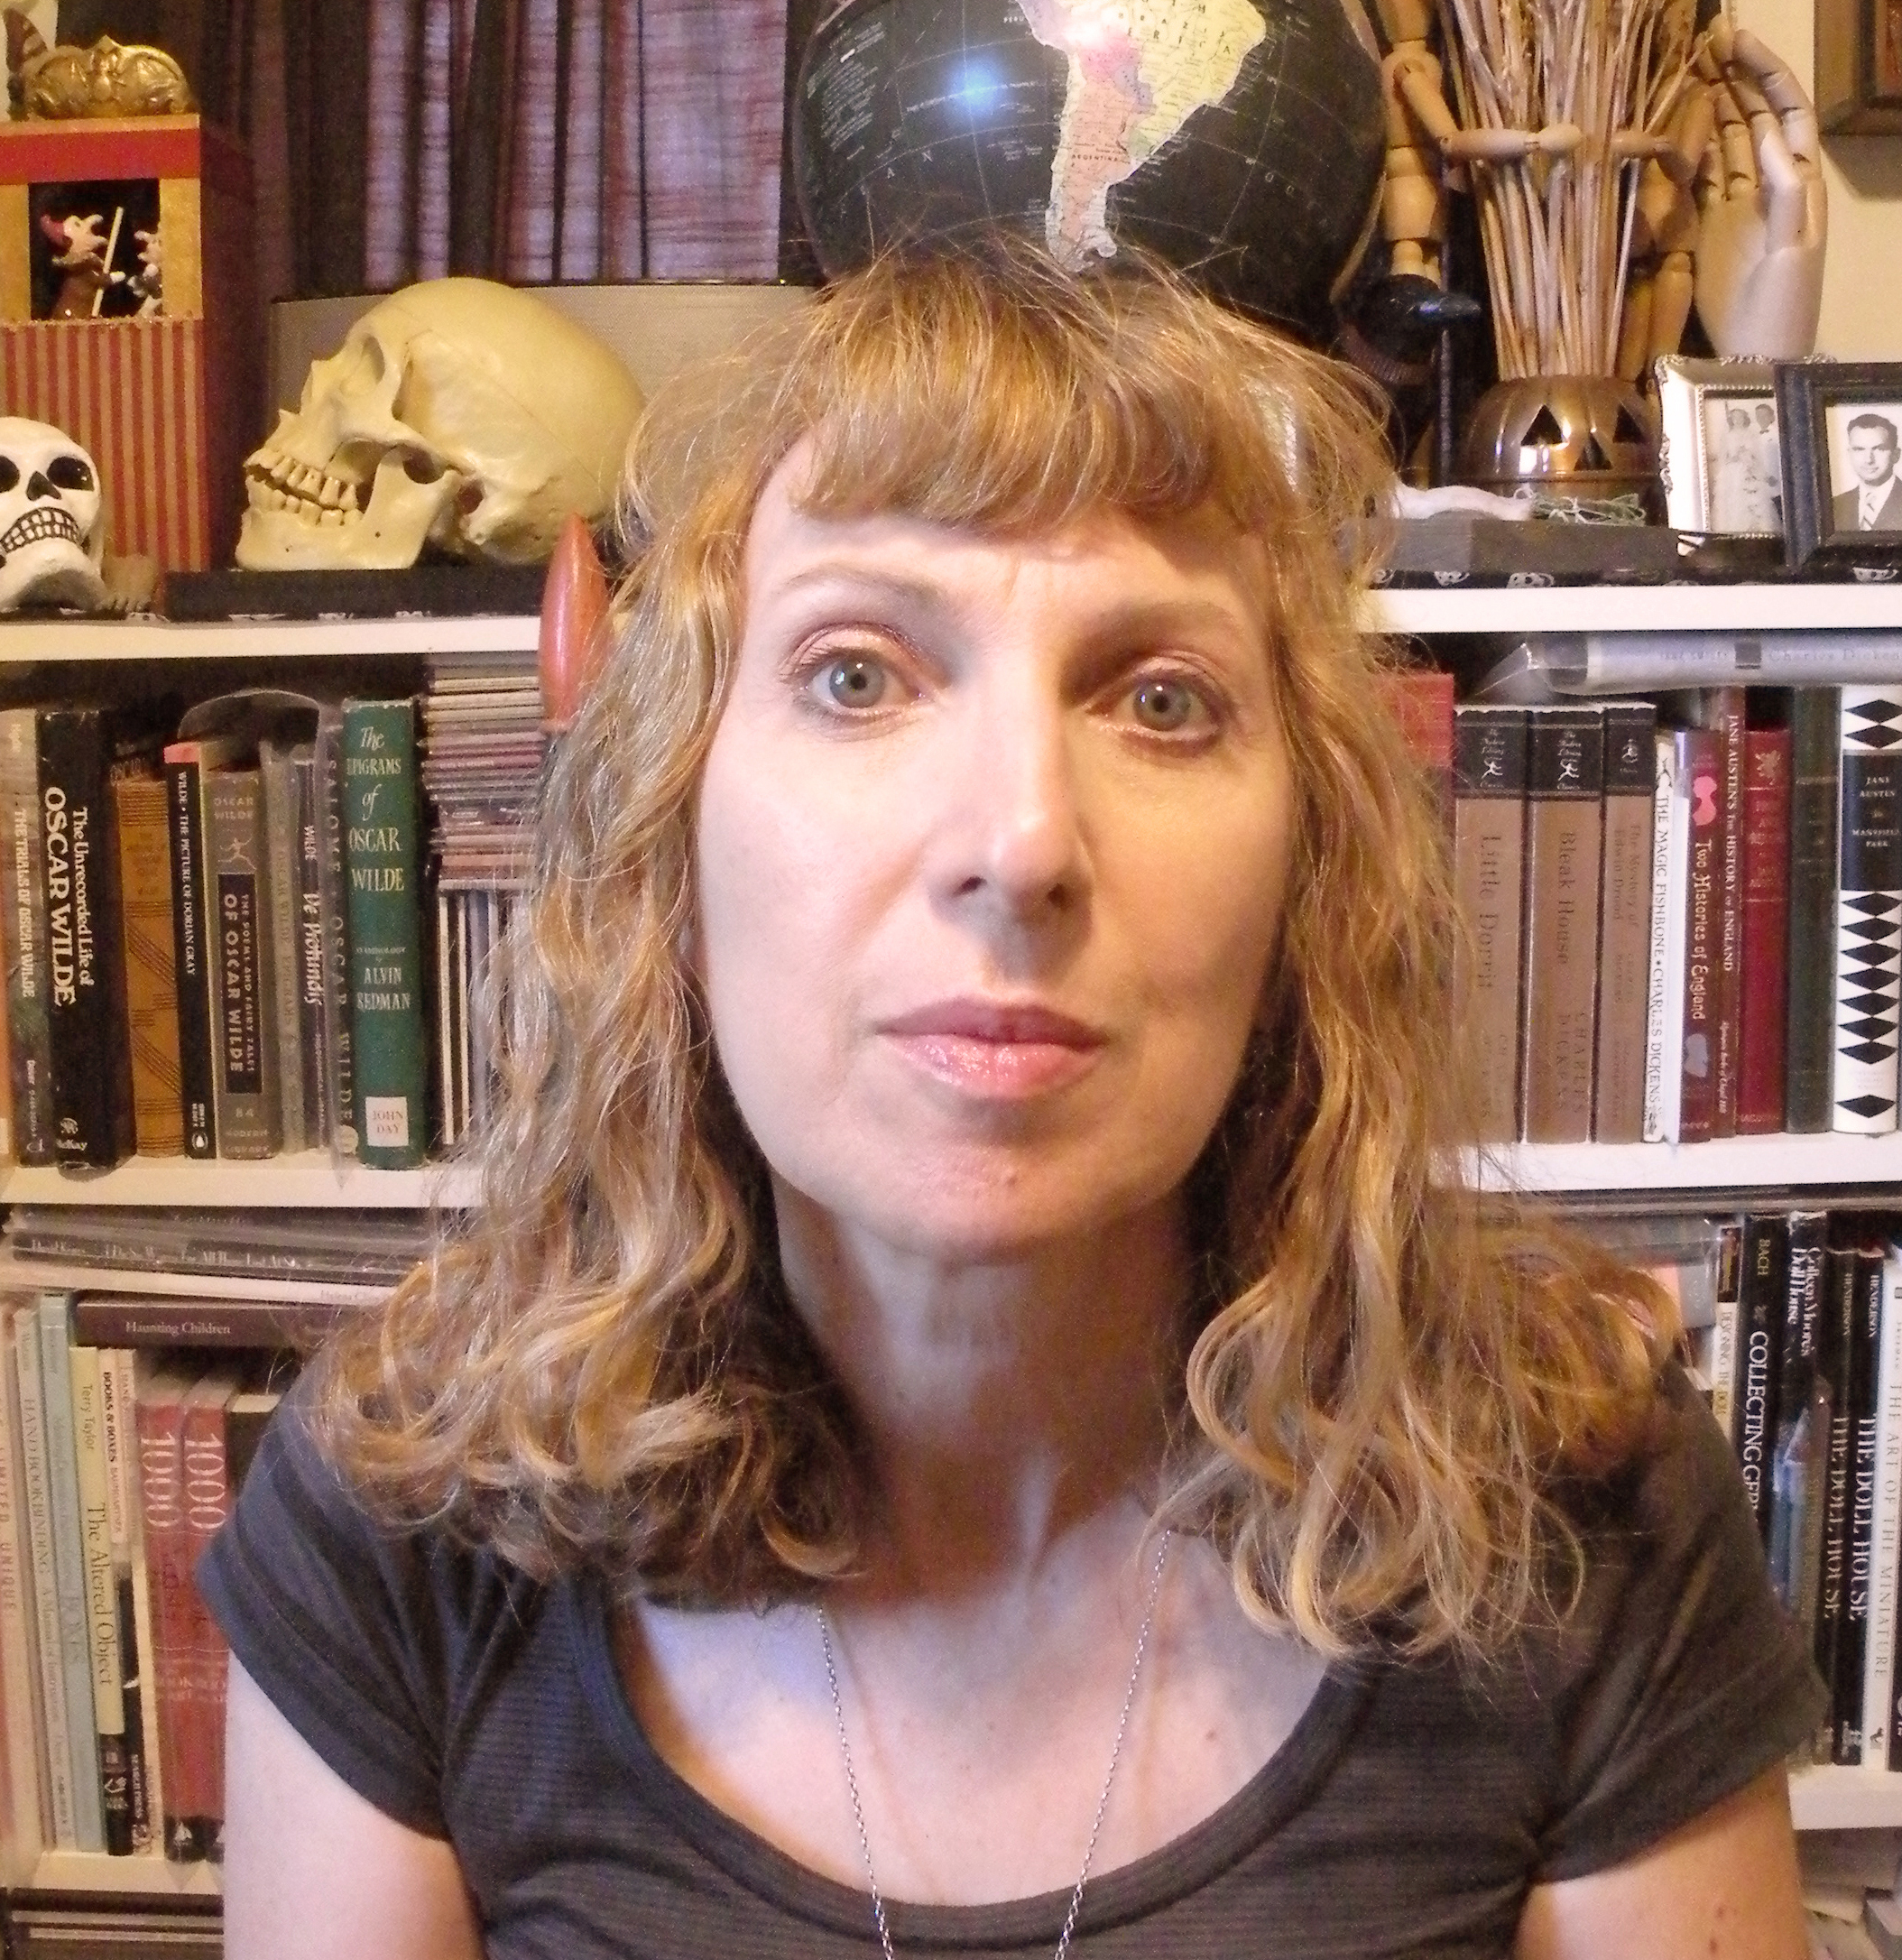 Eileen, a white woman with curly strawberry-blone hair and bangs, looks at the camera in front of a bookcase full of books and objects including a skull and a globe.